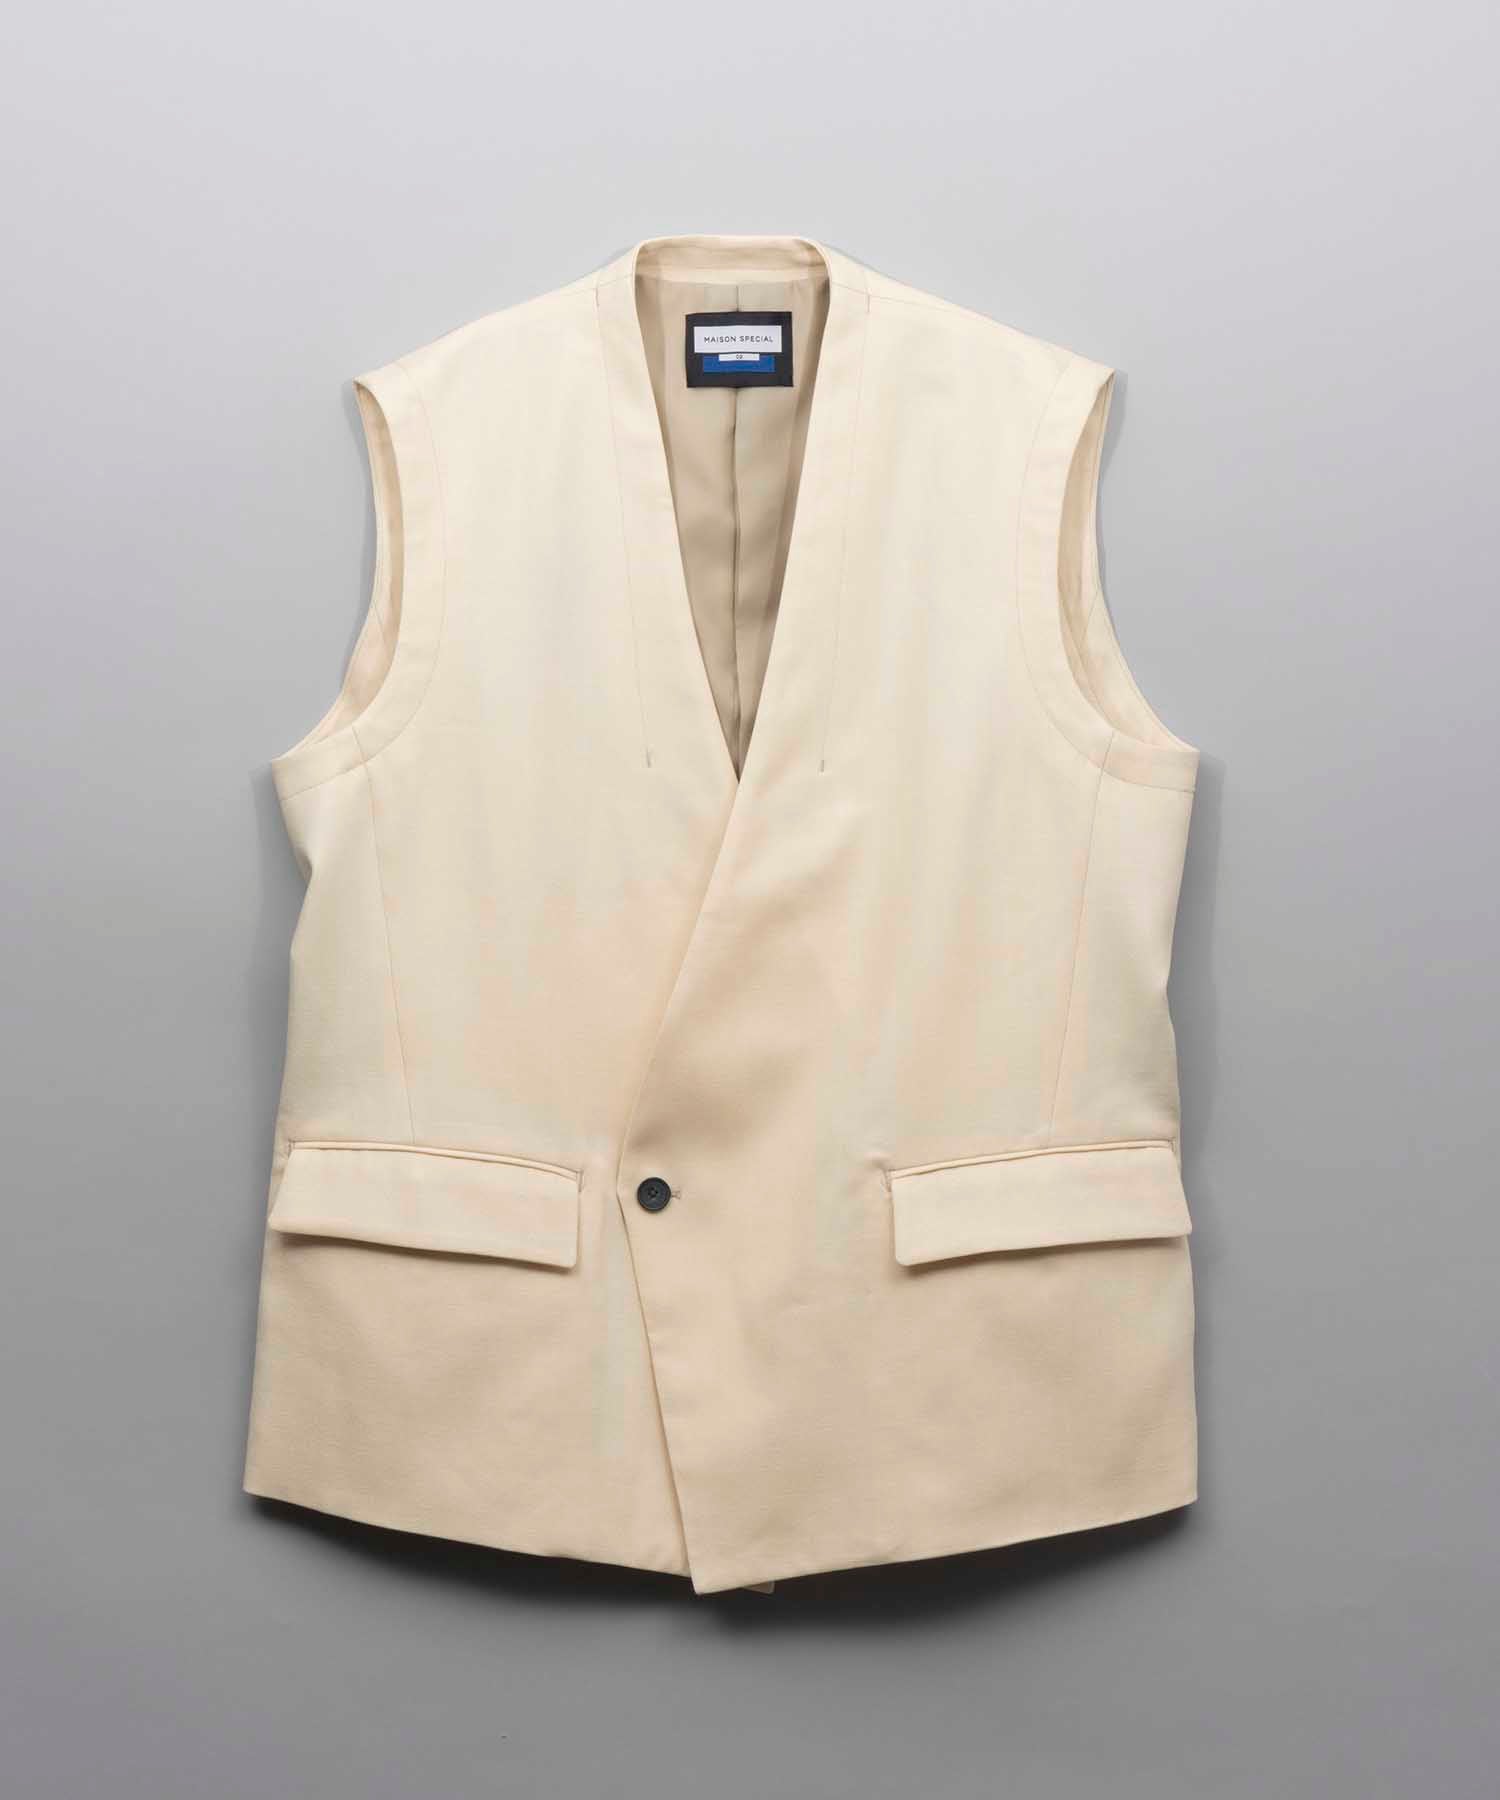 Prime-Over Collarless Gilet